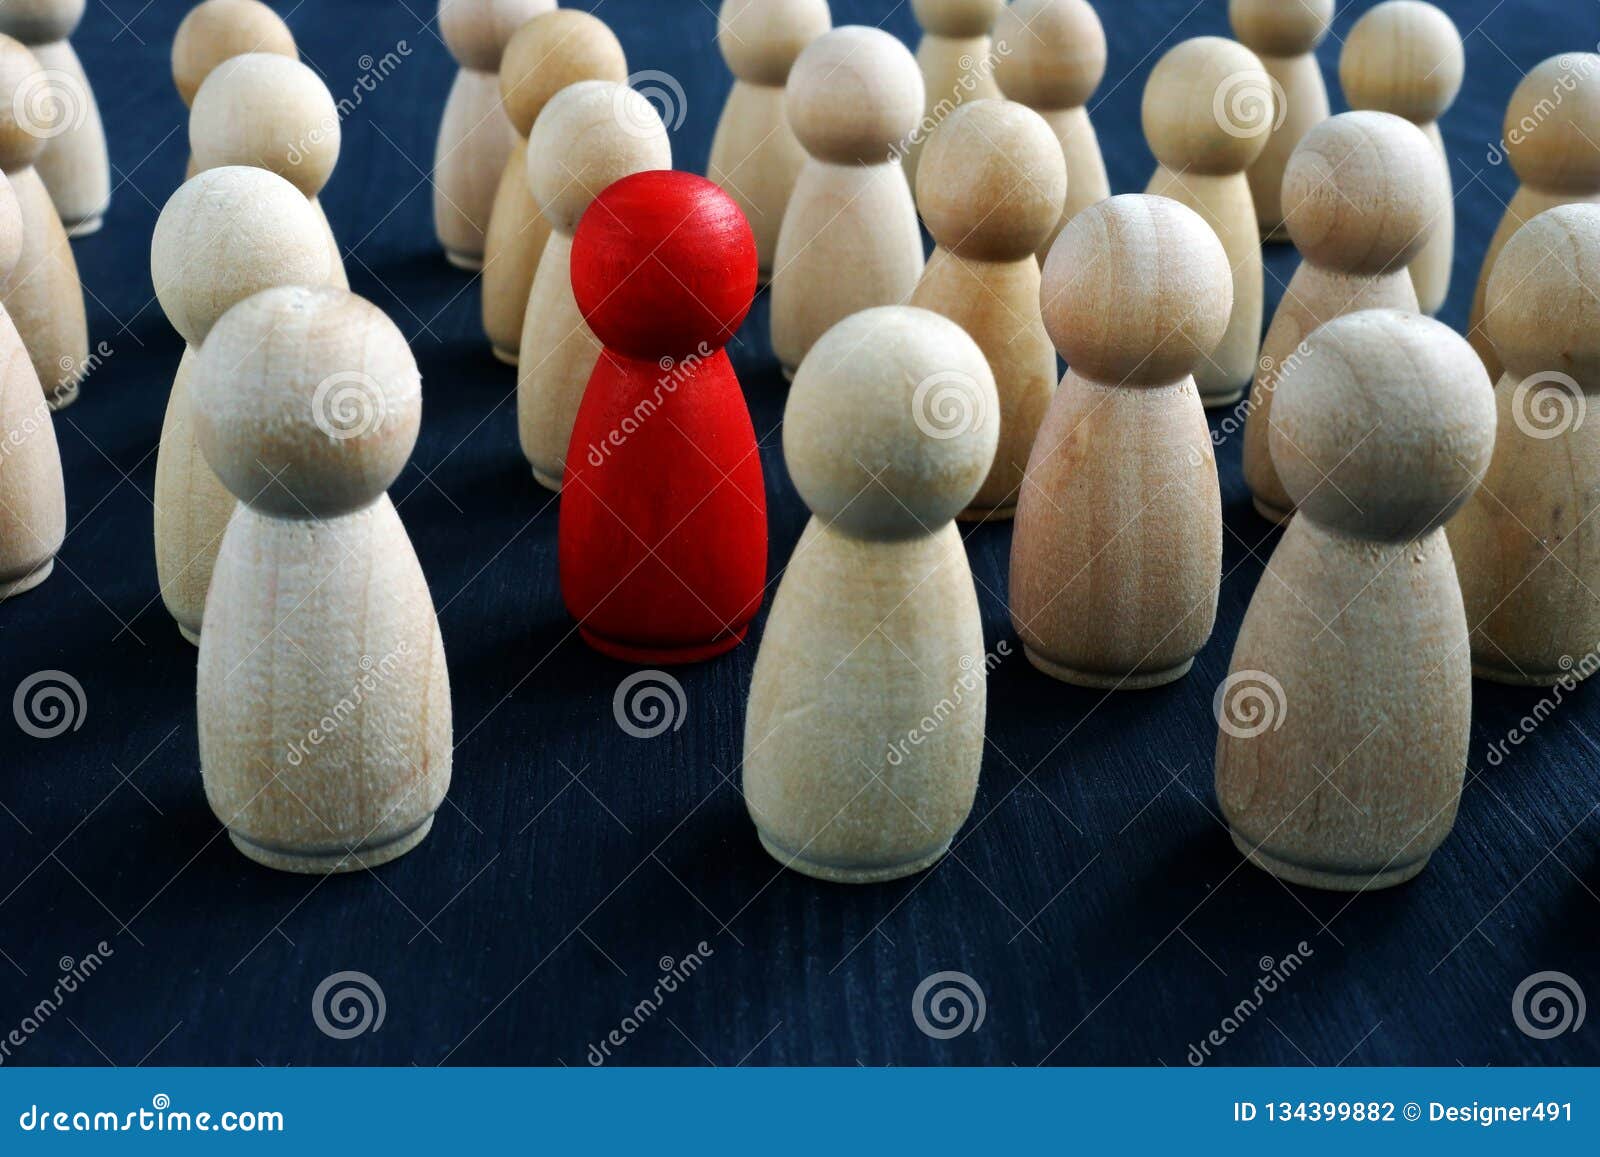 individuality, personality and originality concept. red wooden figure in crowd